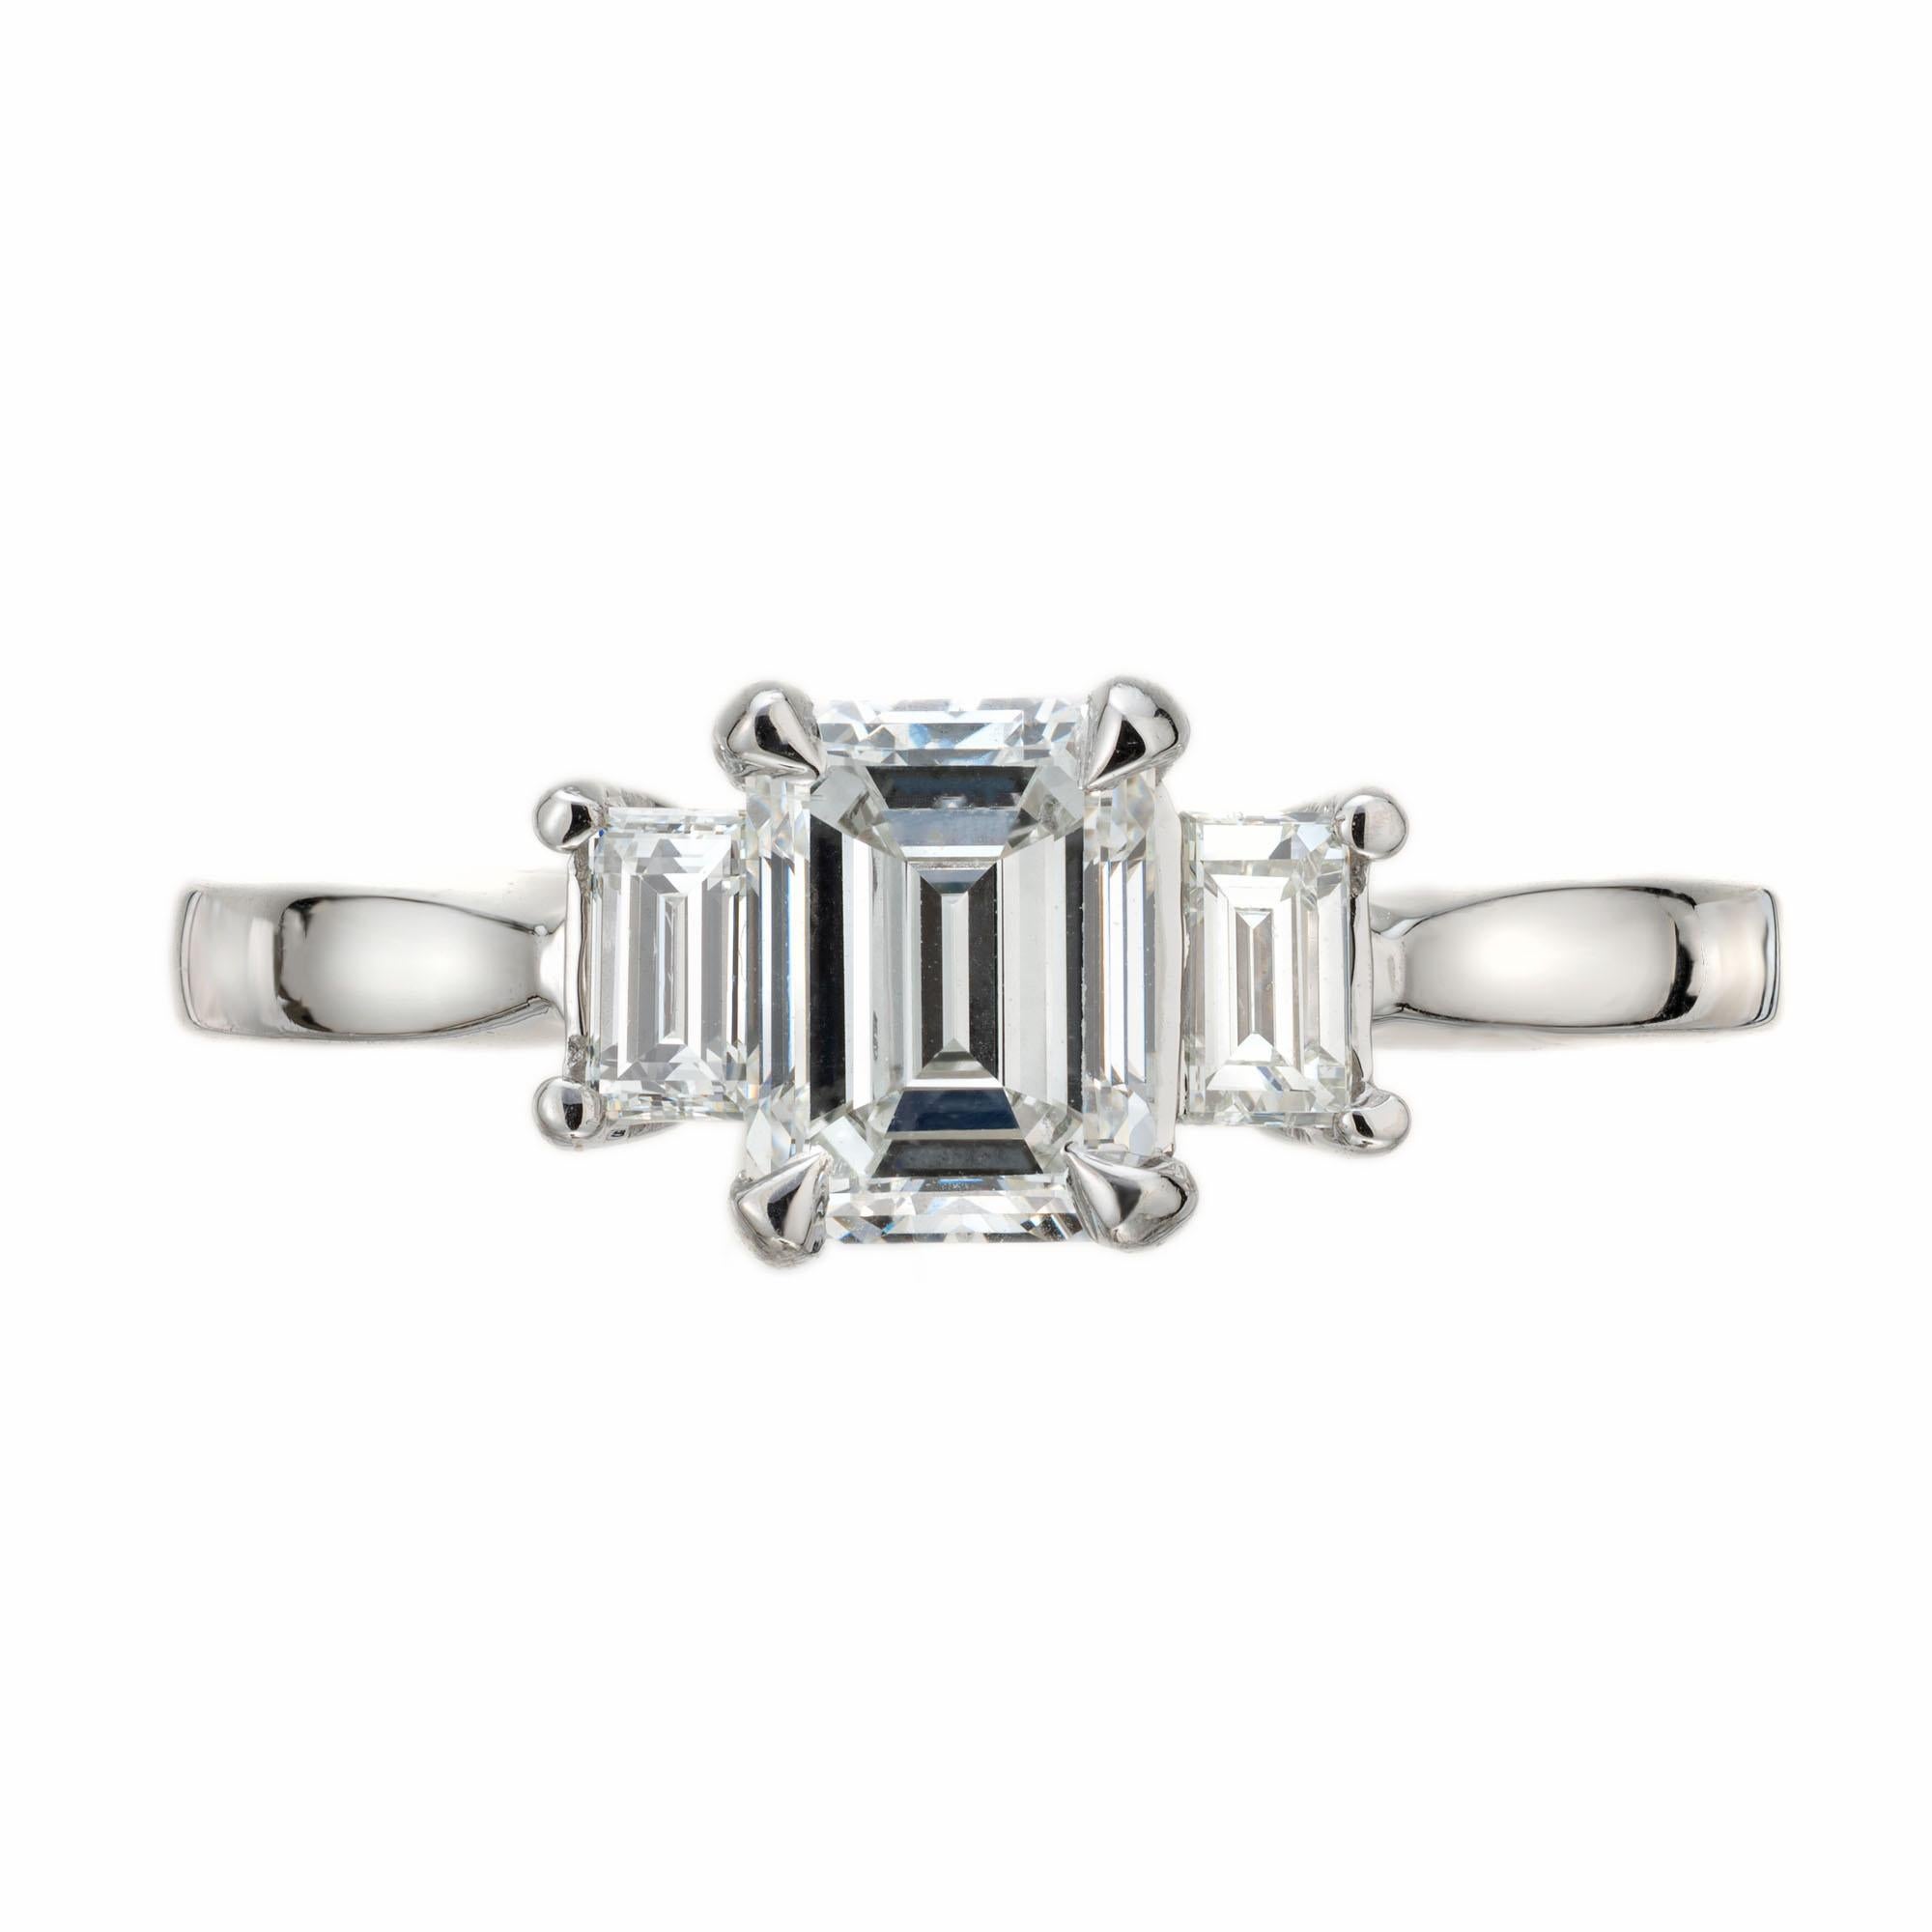 Diamond three-stone engagement ring. GIA Certified emerald cut diamond with 2 emerald cut side diamonds in a platinum setting created in the Peter Suchy Workshop. 

1 emerald cut diamond, G SI2 approx. 1.04cts GIA Certificate # 6203529844
2 emerald